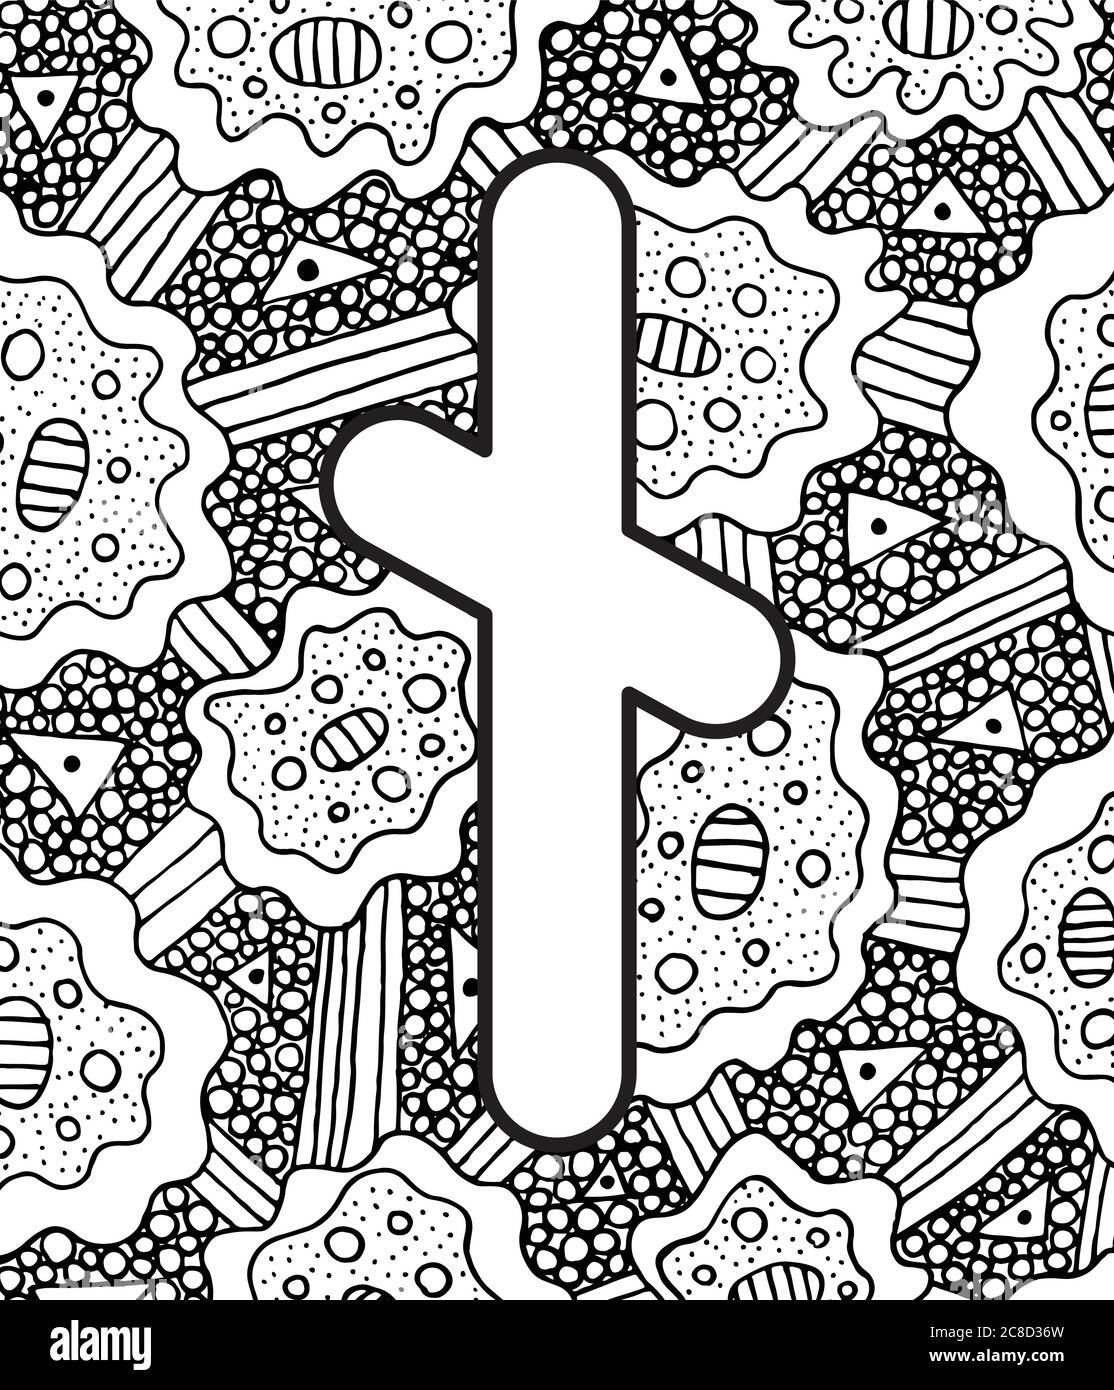 Ancient scandinavic rune nyedis with doodle ornament background. Coloring page for adults. Psychedelic fantastic mystical artwork. Vector illustration Stock Vector